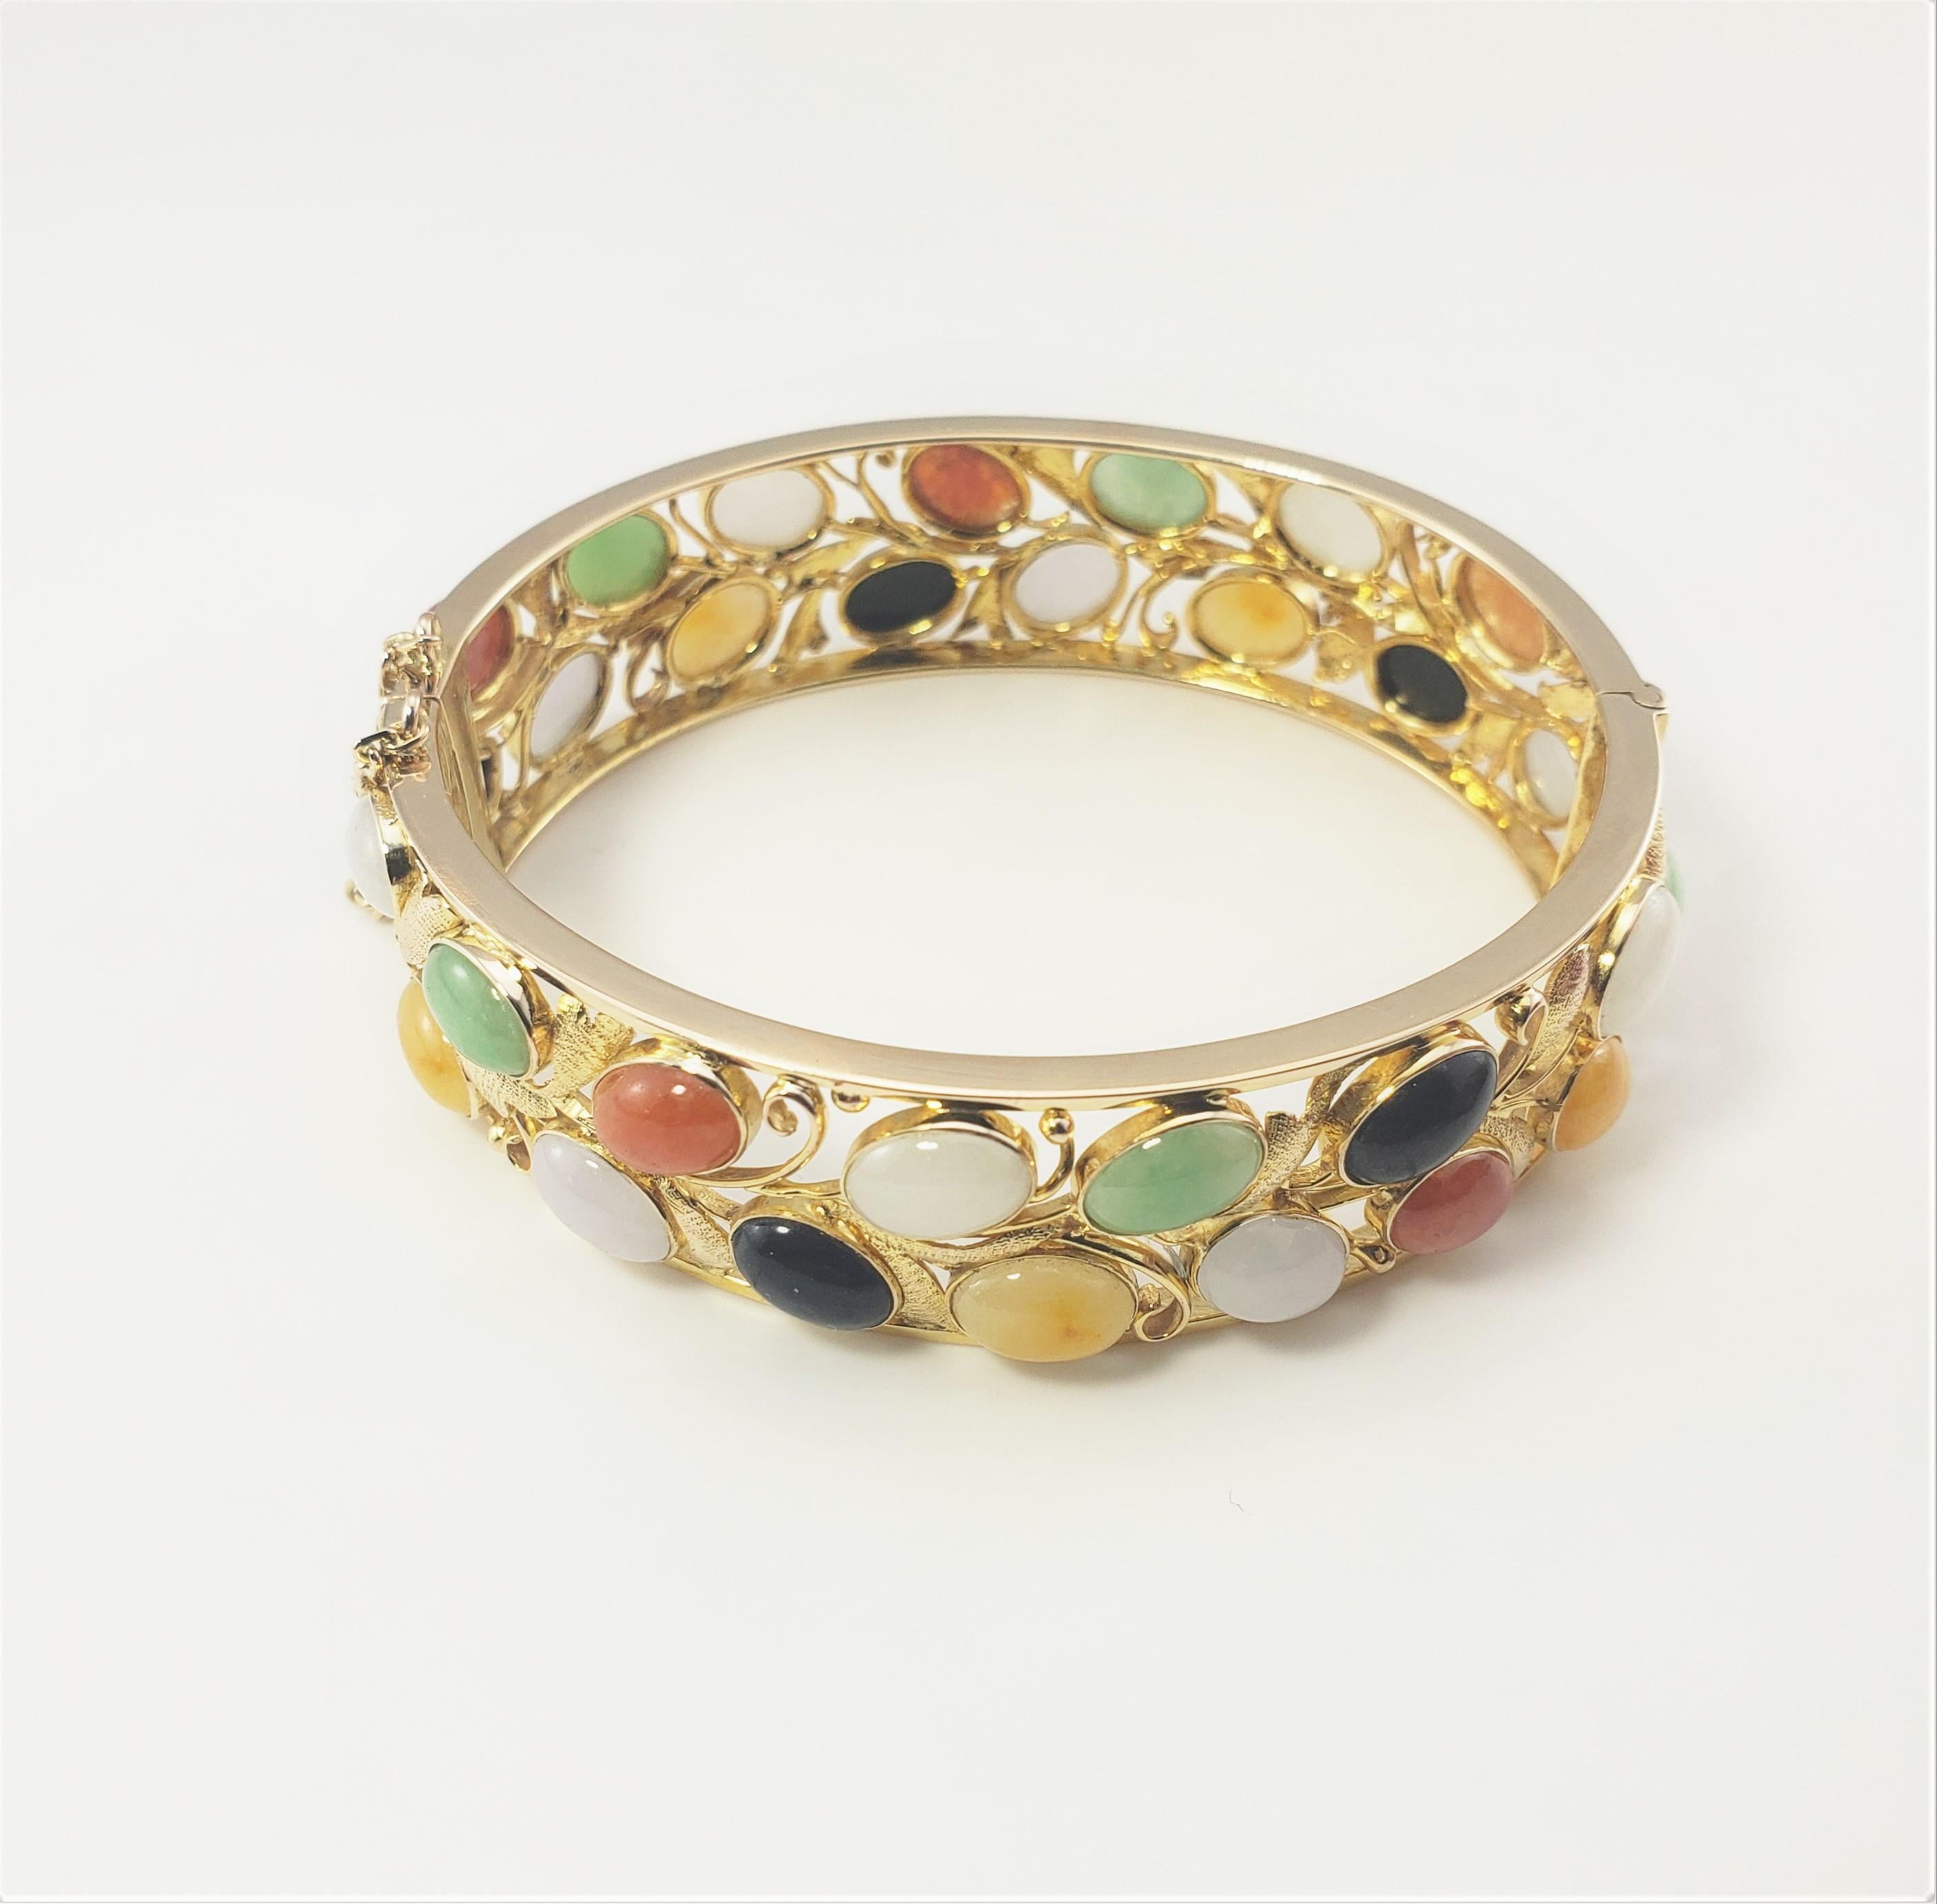 14 Karat Yellow Gold Gemstone Bangle Bracelet-

This lovely hinged bracelet features 30 oval gemstones (carnelian, onyx and jade) set in beautifully detailed 14K yellow gold.  
Width:  16 mm.  Safety chain closure.

Size: 6.5 inches 

Weight:  19.8